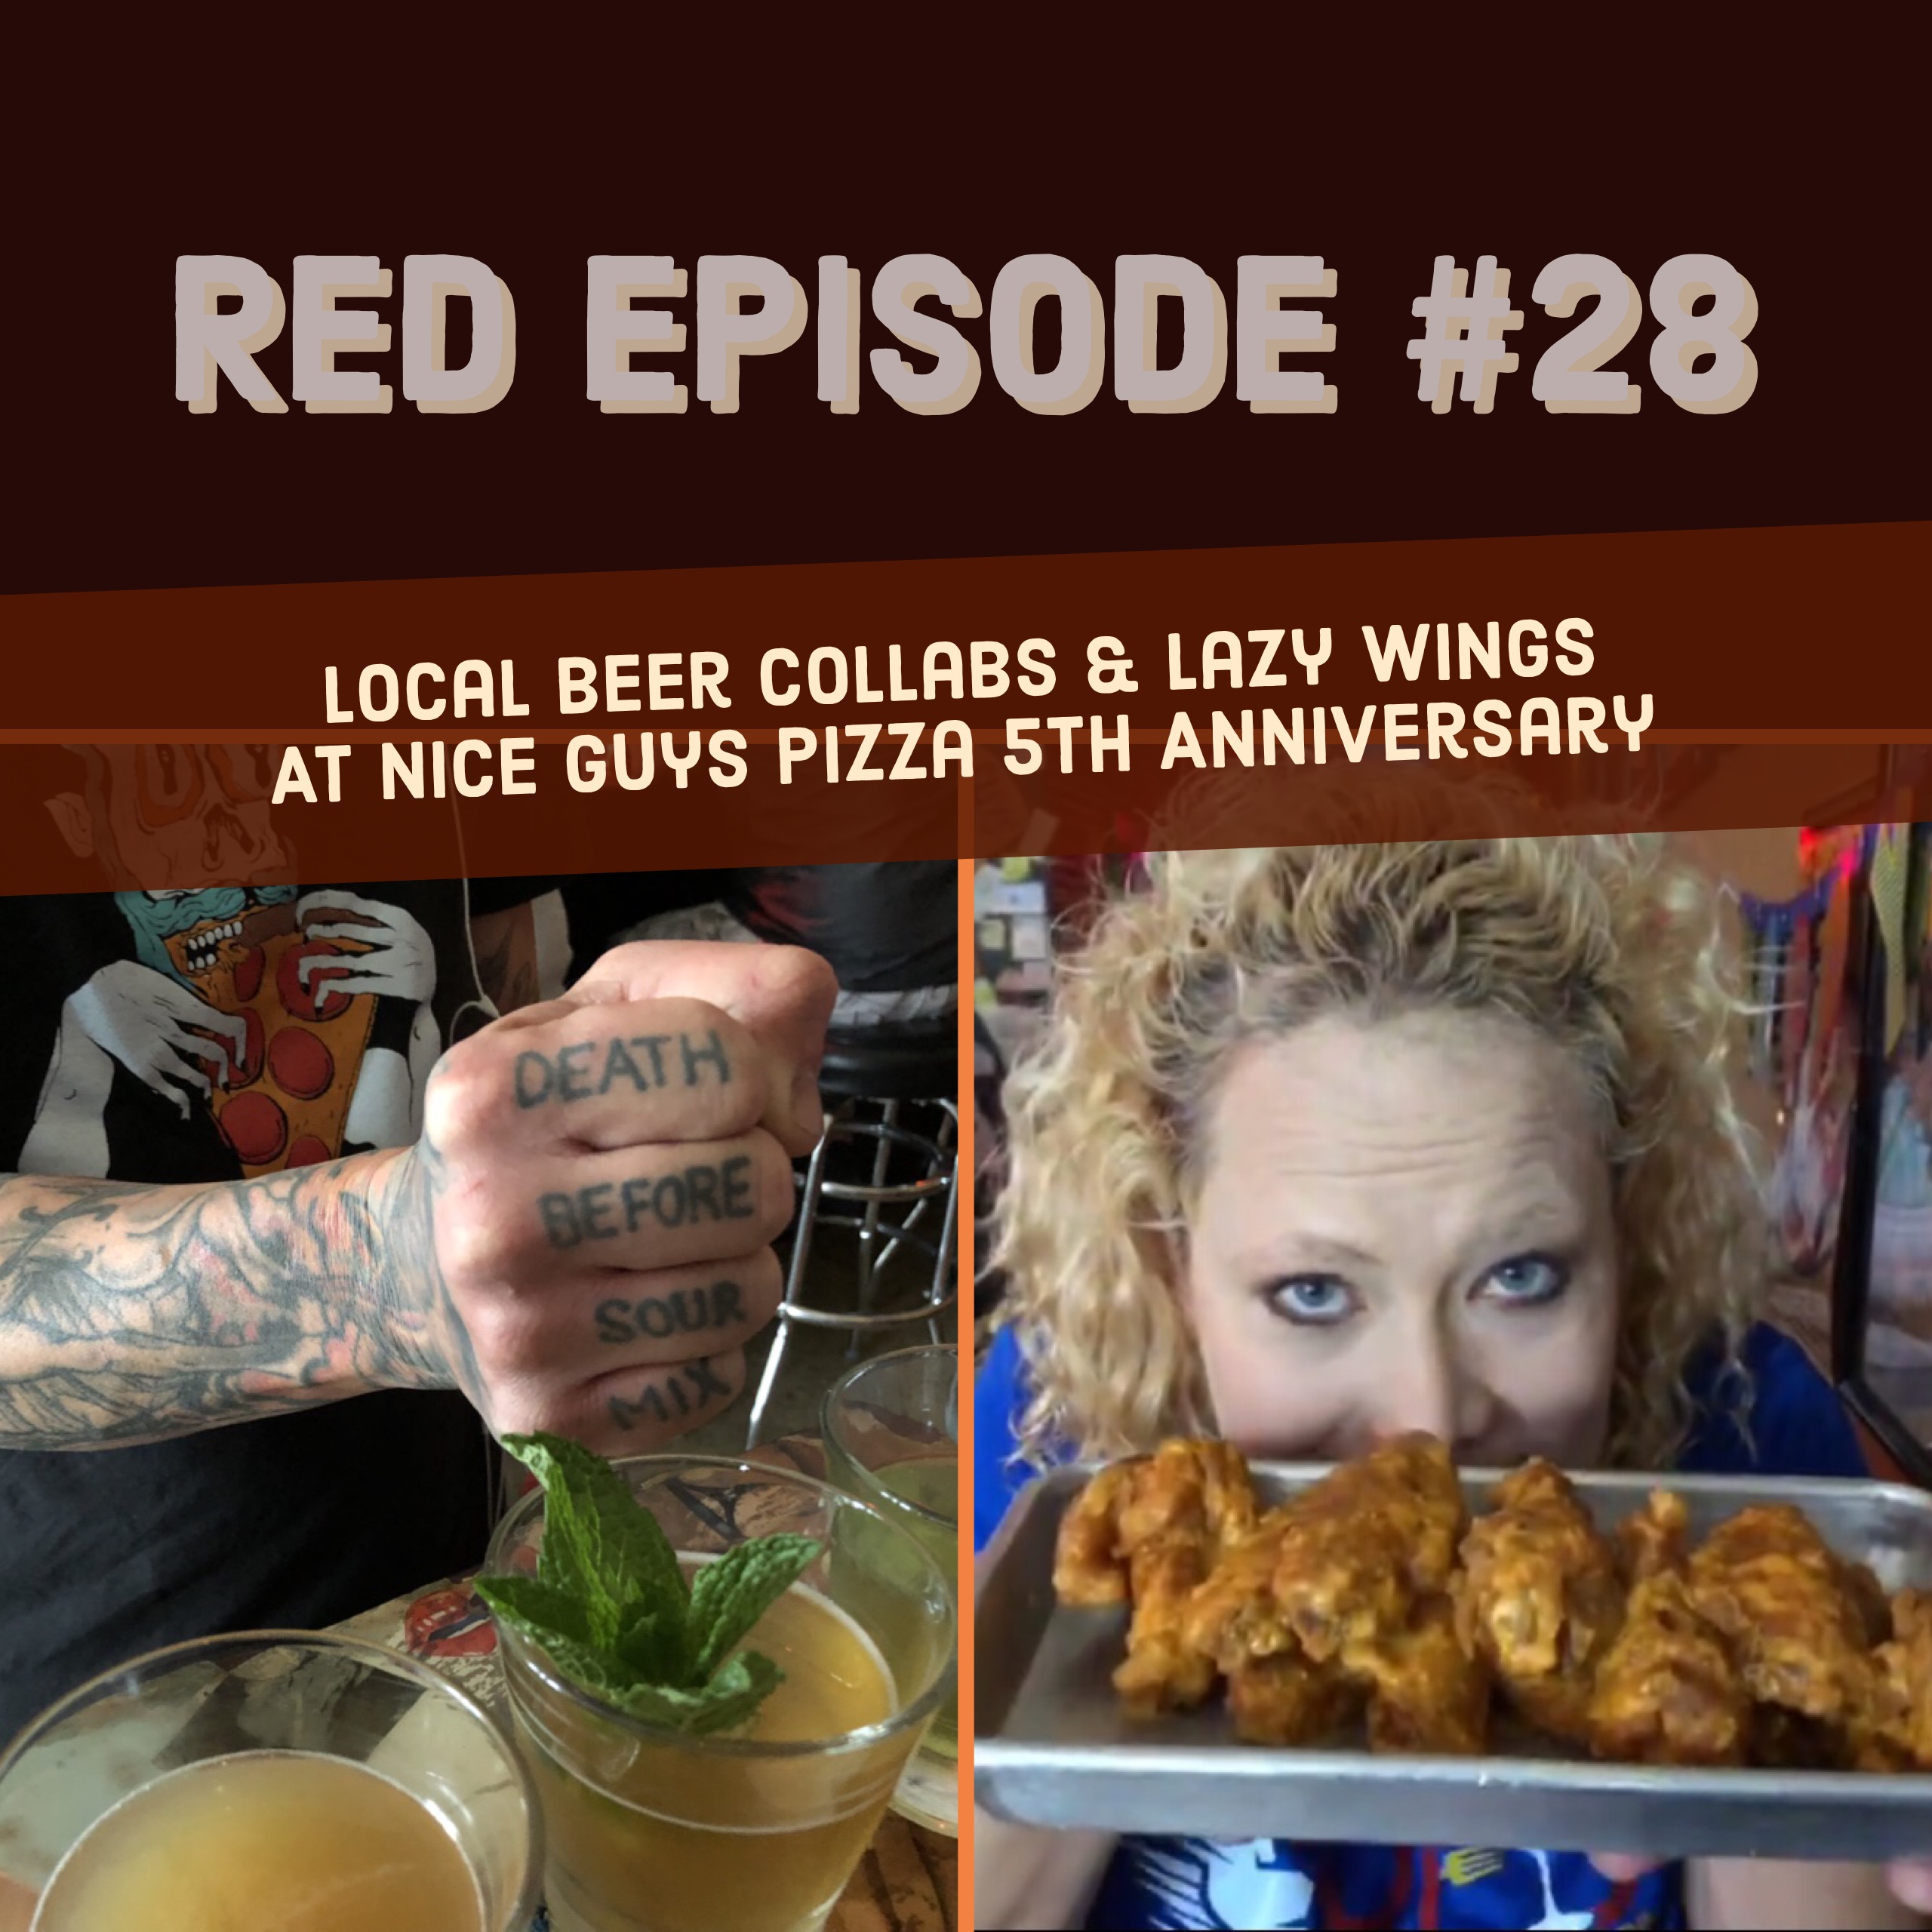 RED Episode #28: Local Beer Collabs & Lazy Wings at Nice Guys 5th Anniversary